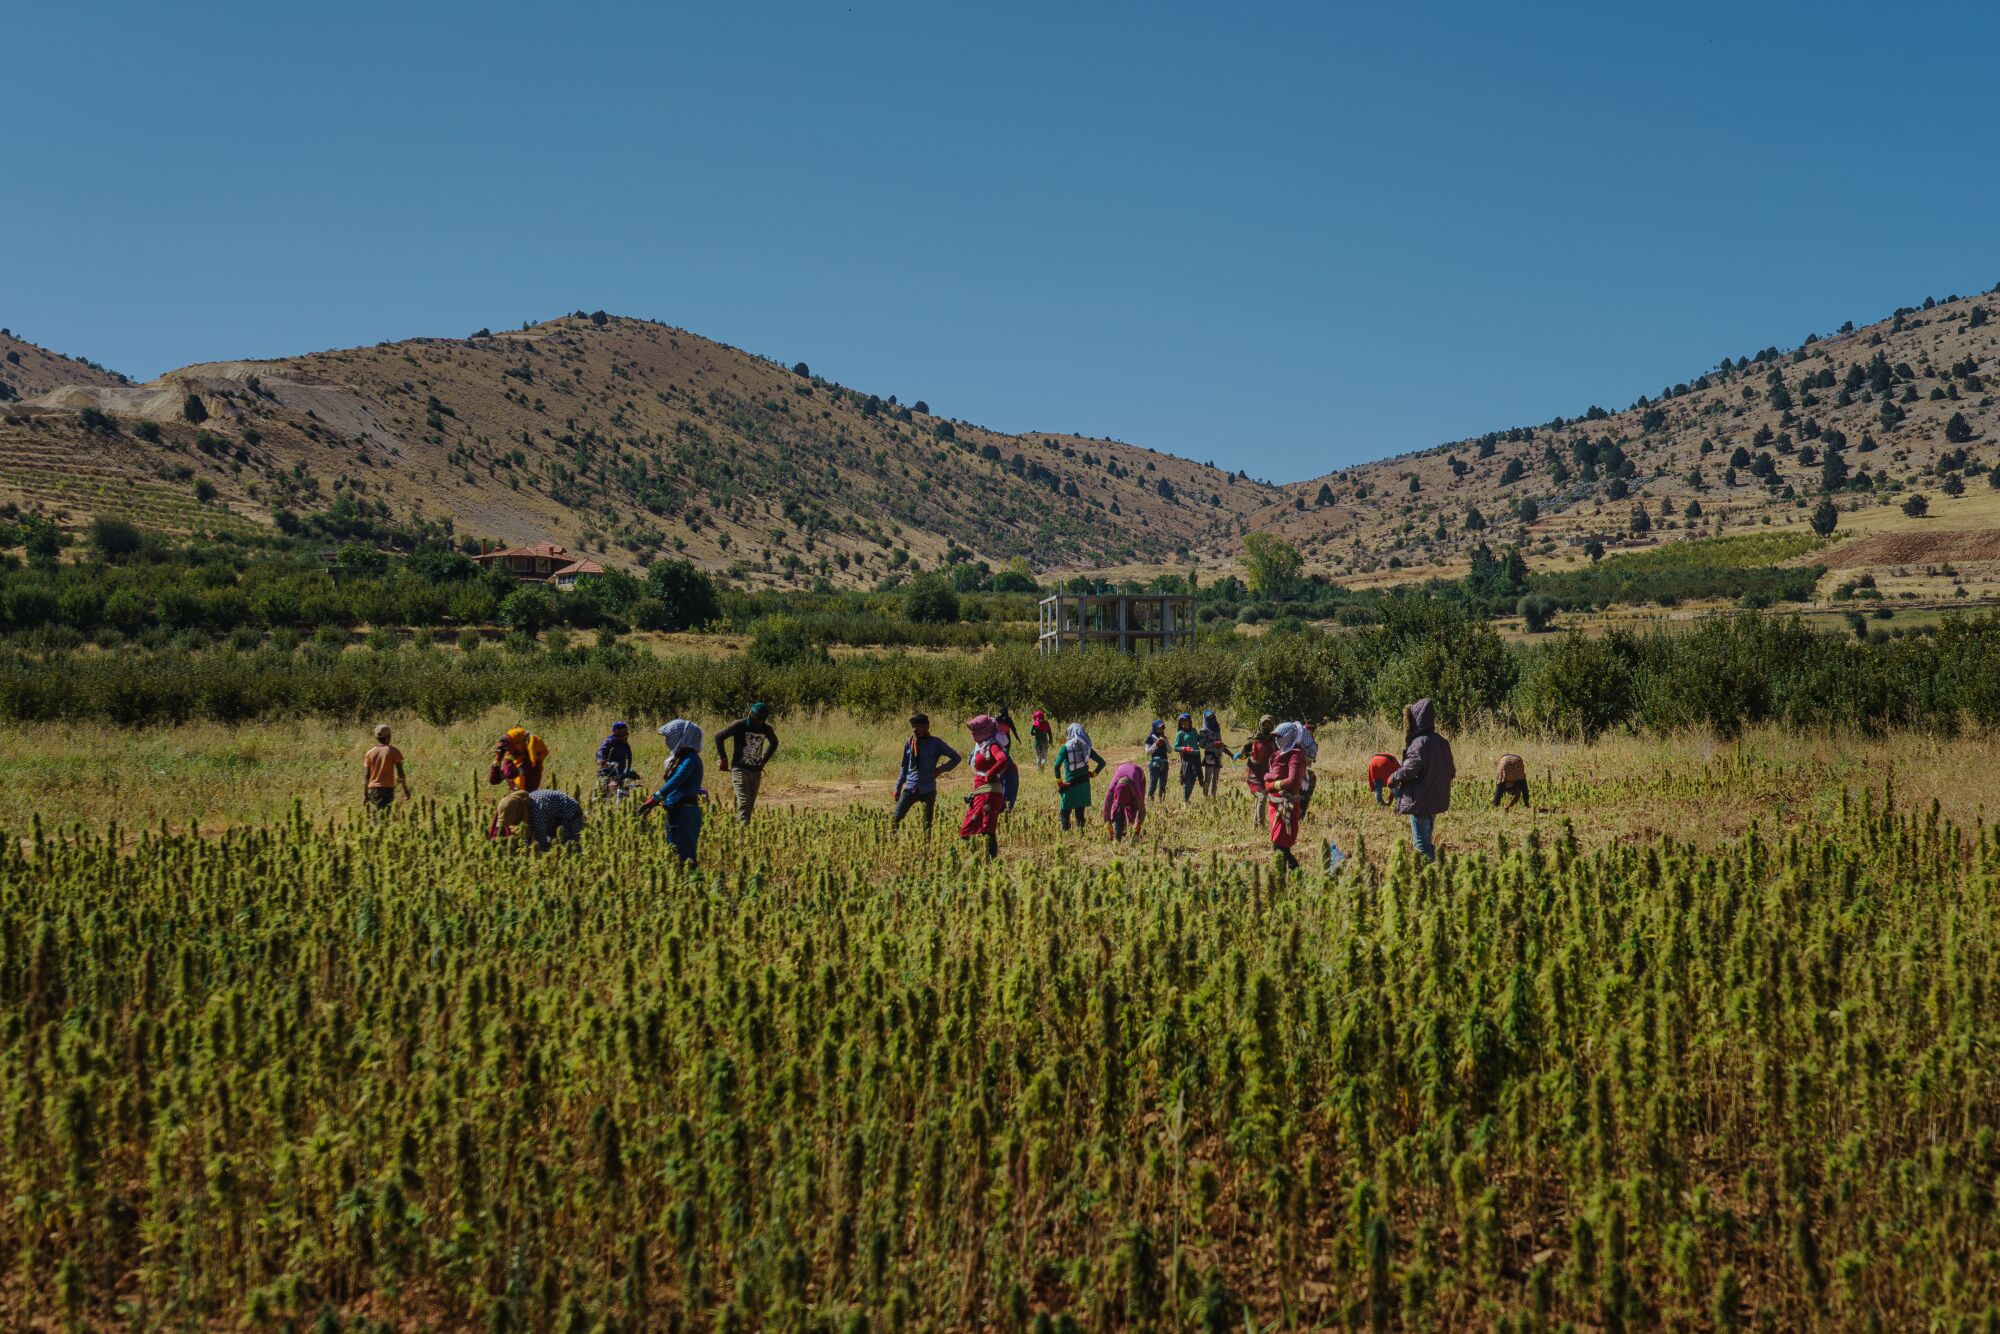 Farmworkers at work in a cannabis field in Yammouneh, Lebanon.